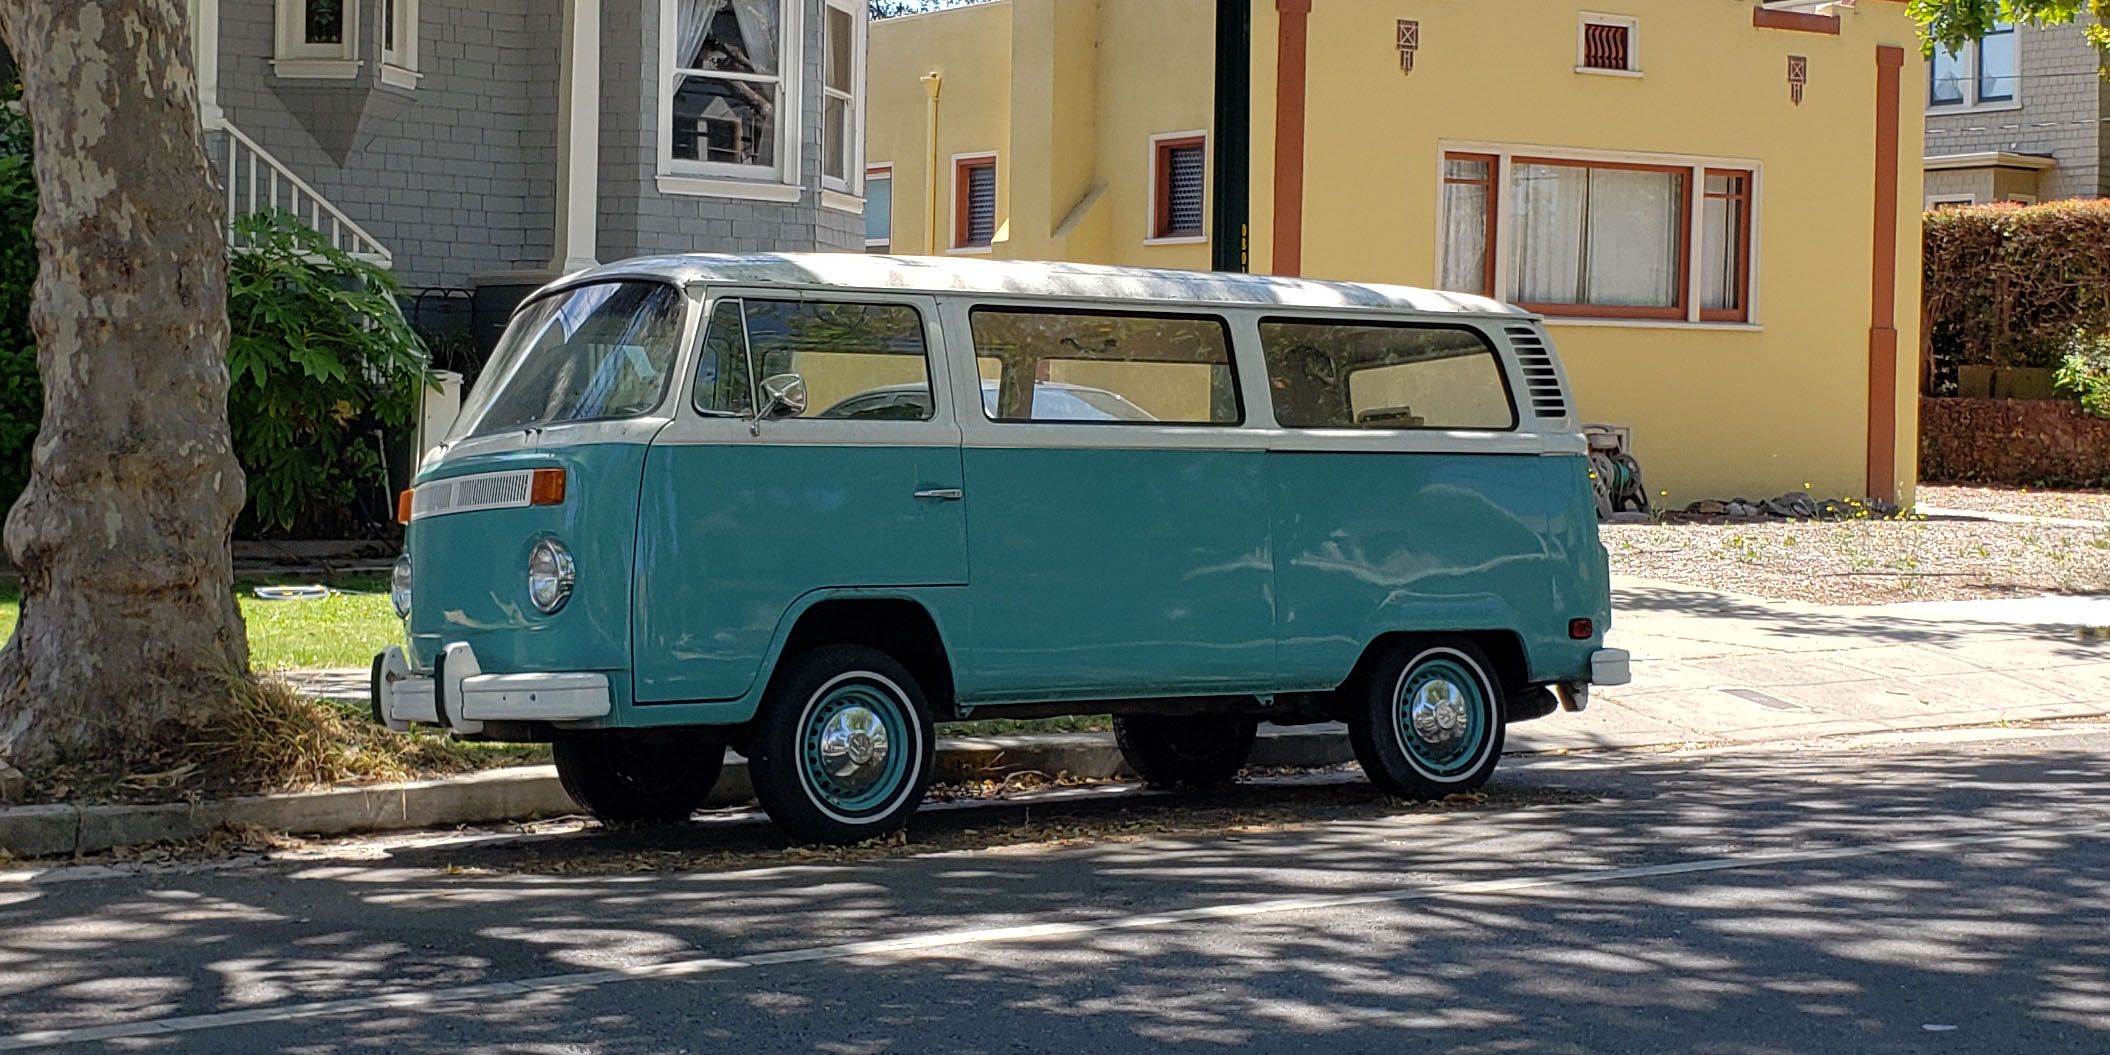 Late Volkswagen Transporter Is Down On the Alameda